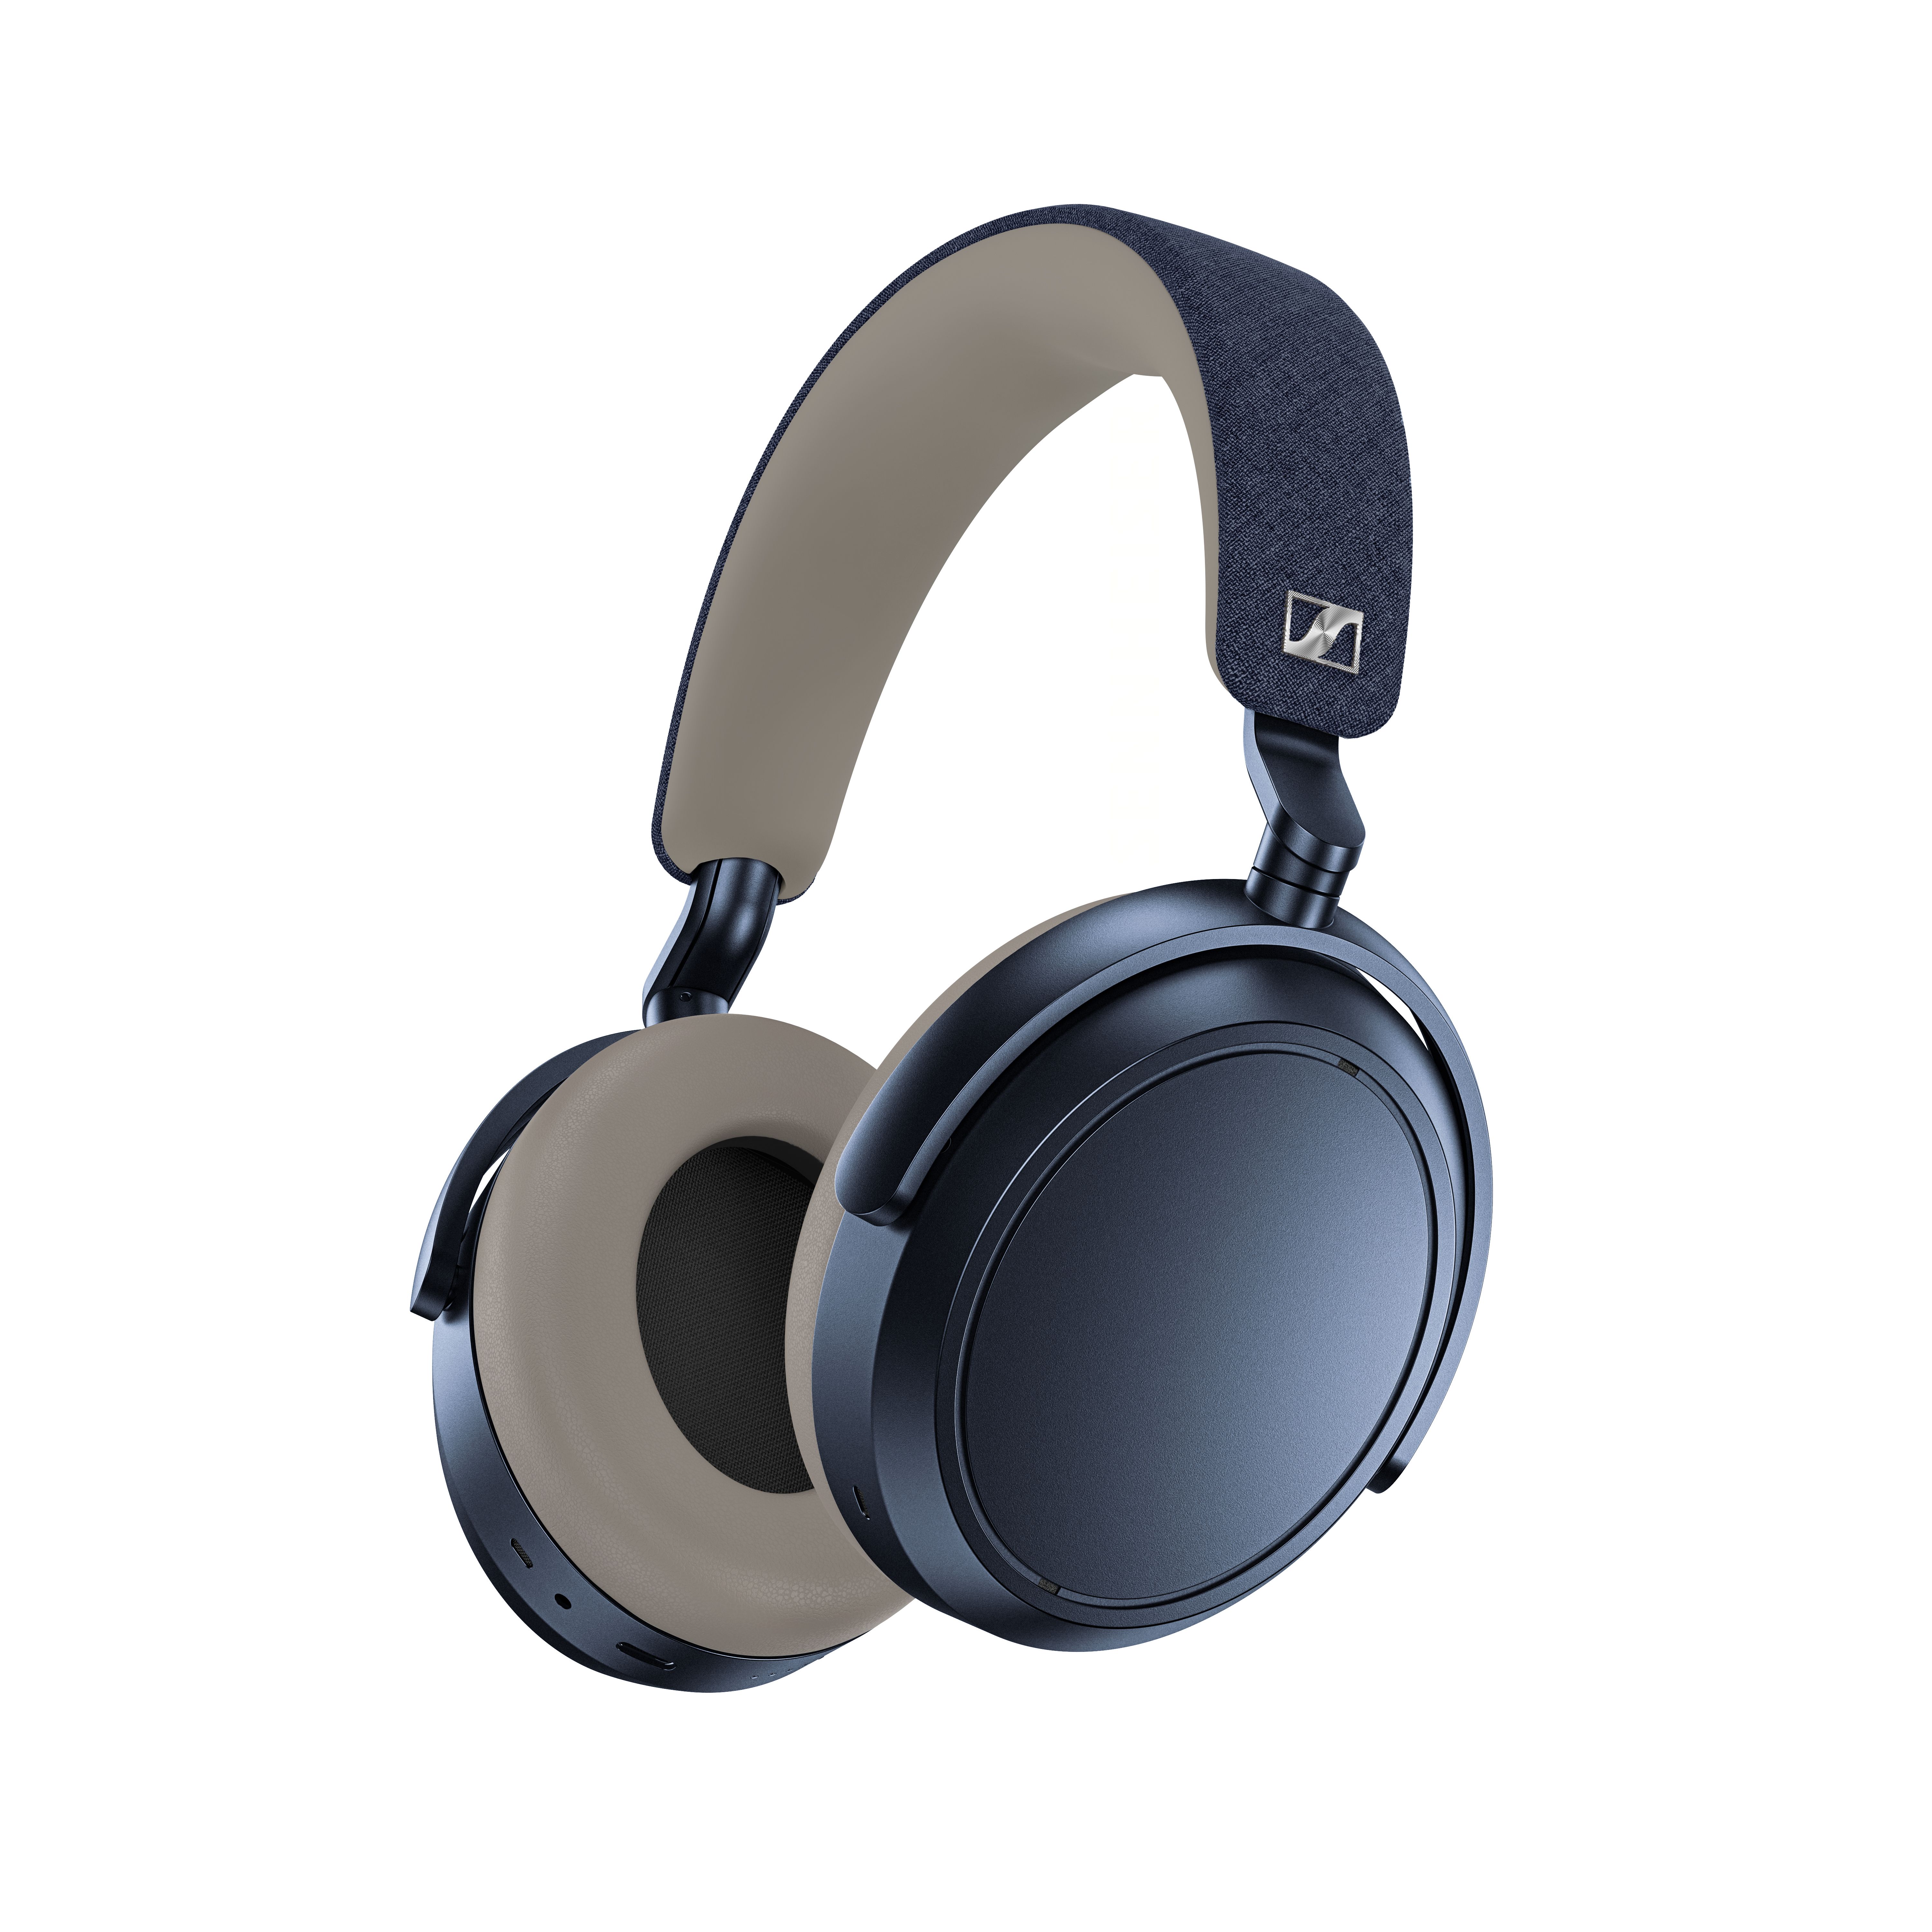 Sennheiser unveils two fresh colors for the Momentum 4 Wireless